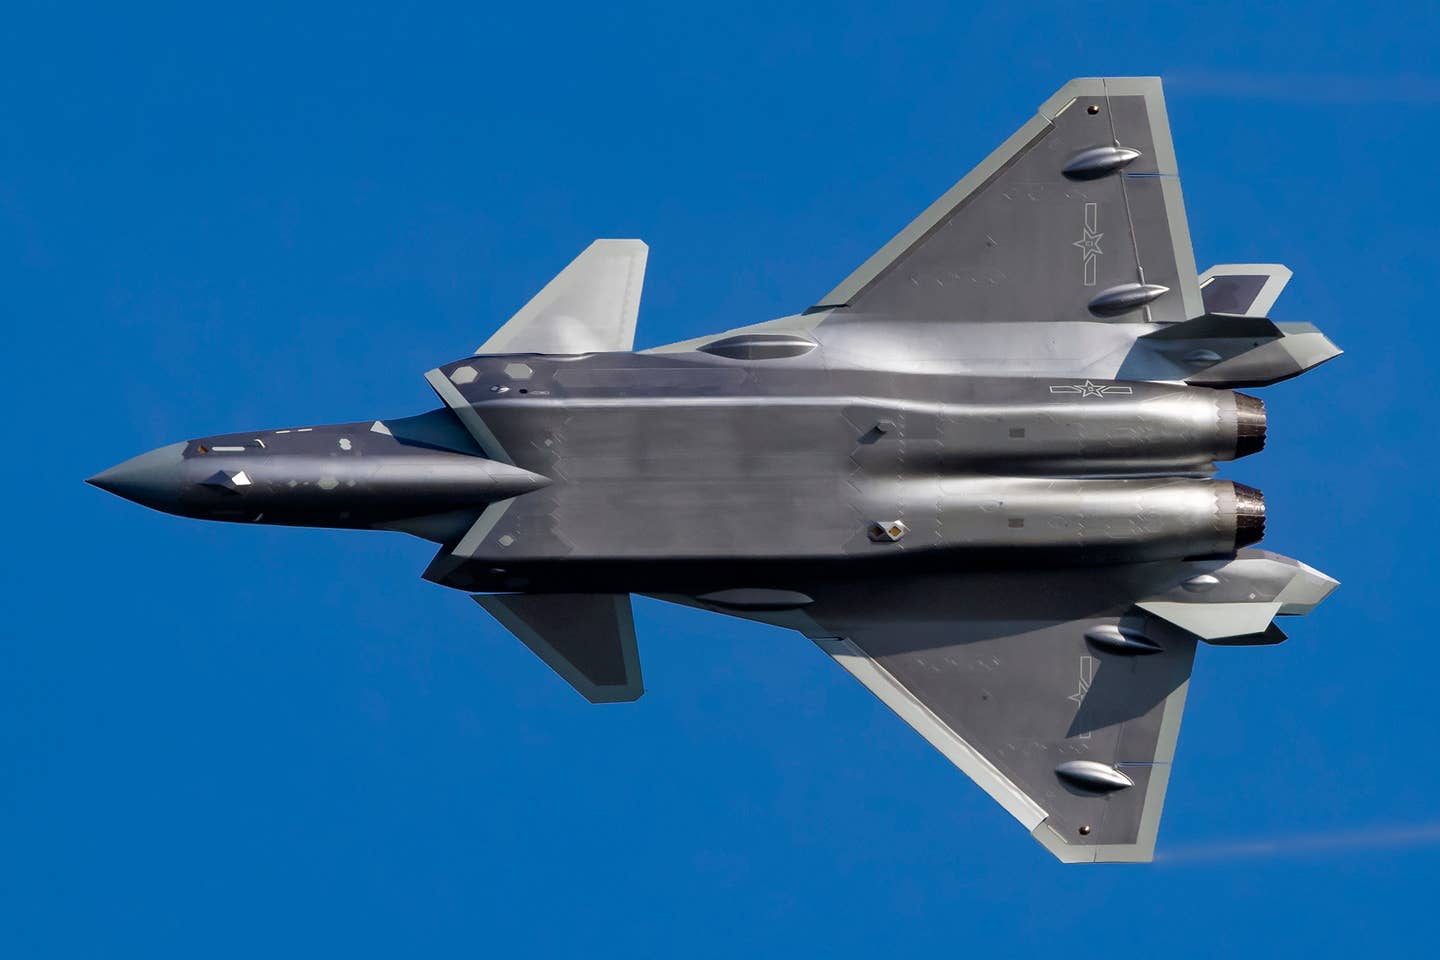 A J-20 stealth fighter during Airshow China 2021 at Zhuhai, in the Guangdong Province of China. <em>Photo by Chen Chang/VCG via Getty Images</em>